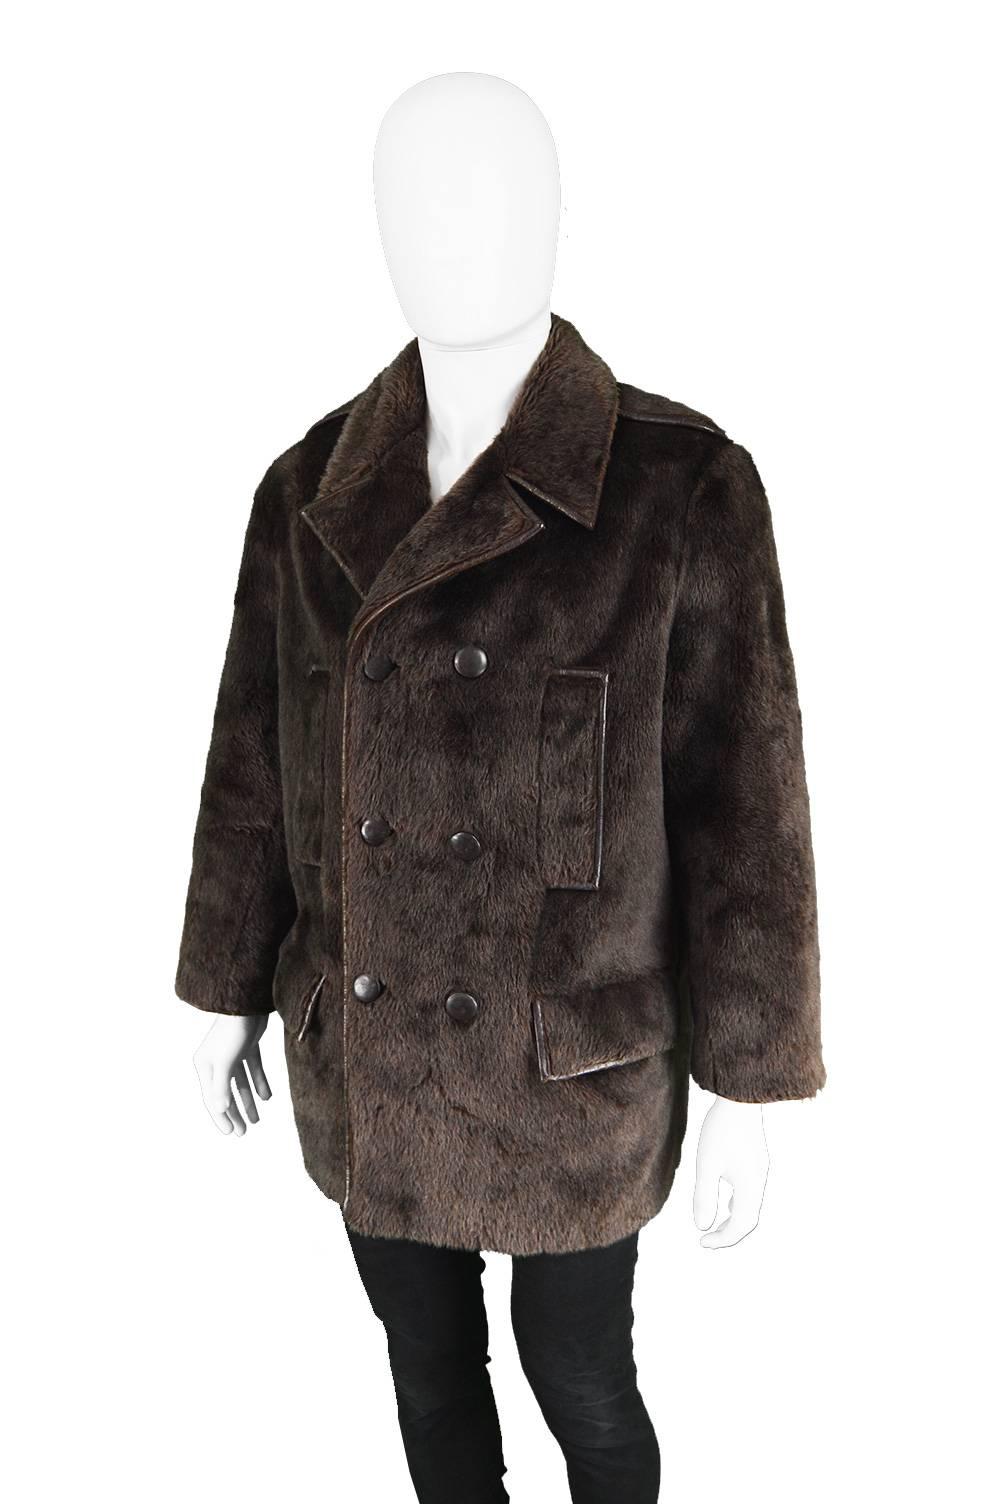 Men's Vintage Brown Faux Fur Coat with Double Breasted Buttons, 1970s For Sale 1